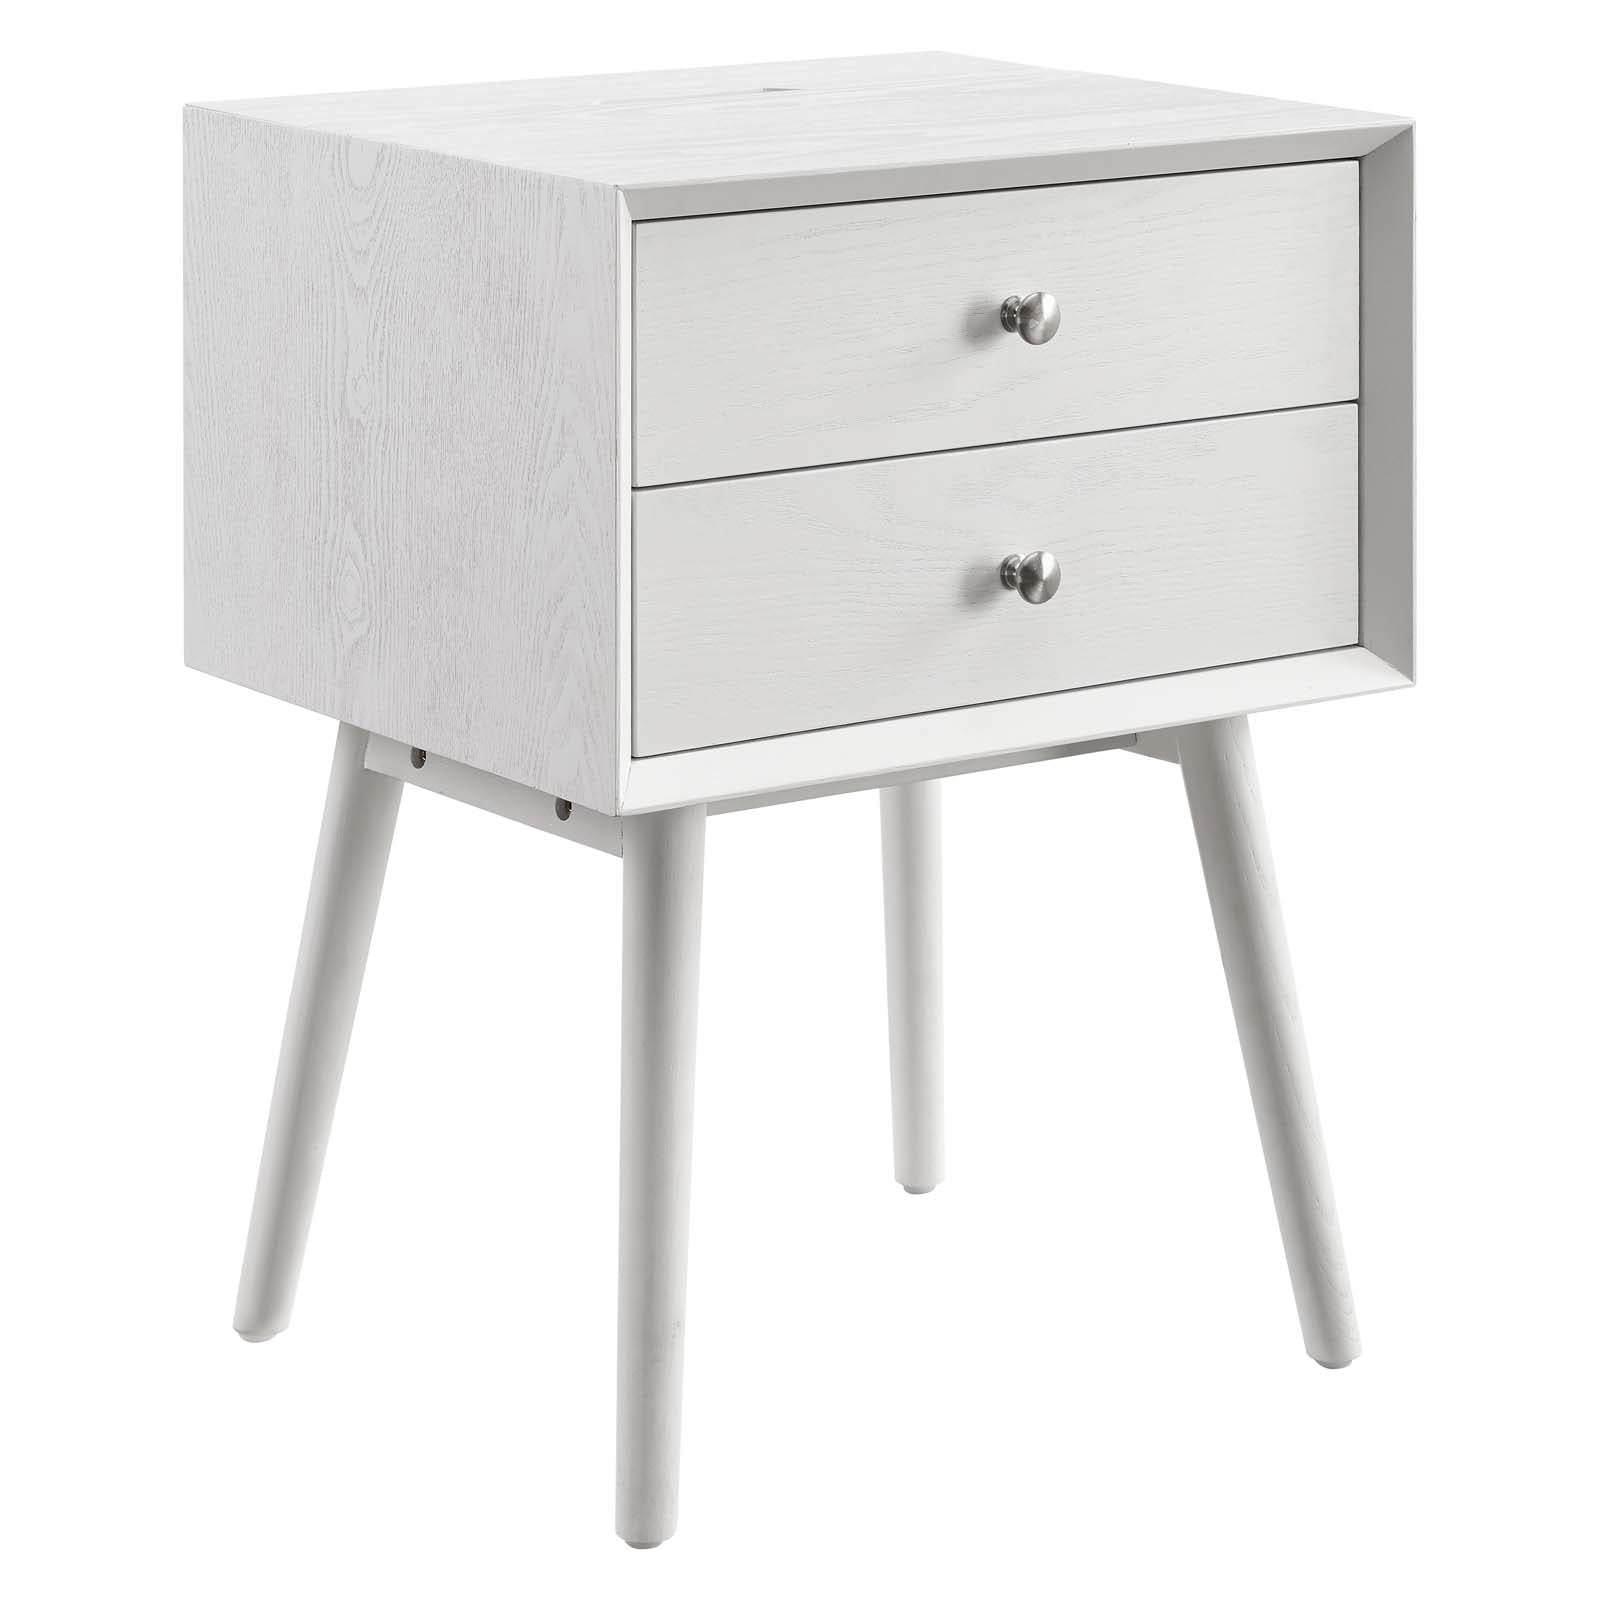 Modway Nightstands & Side Tables - Ember Wood Nightstand With USB Ports White White